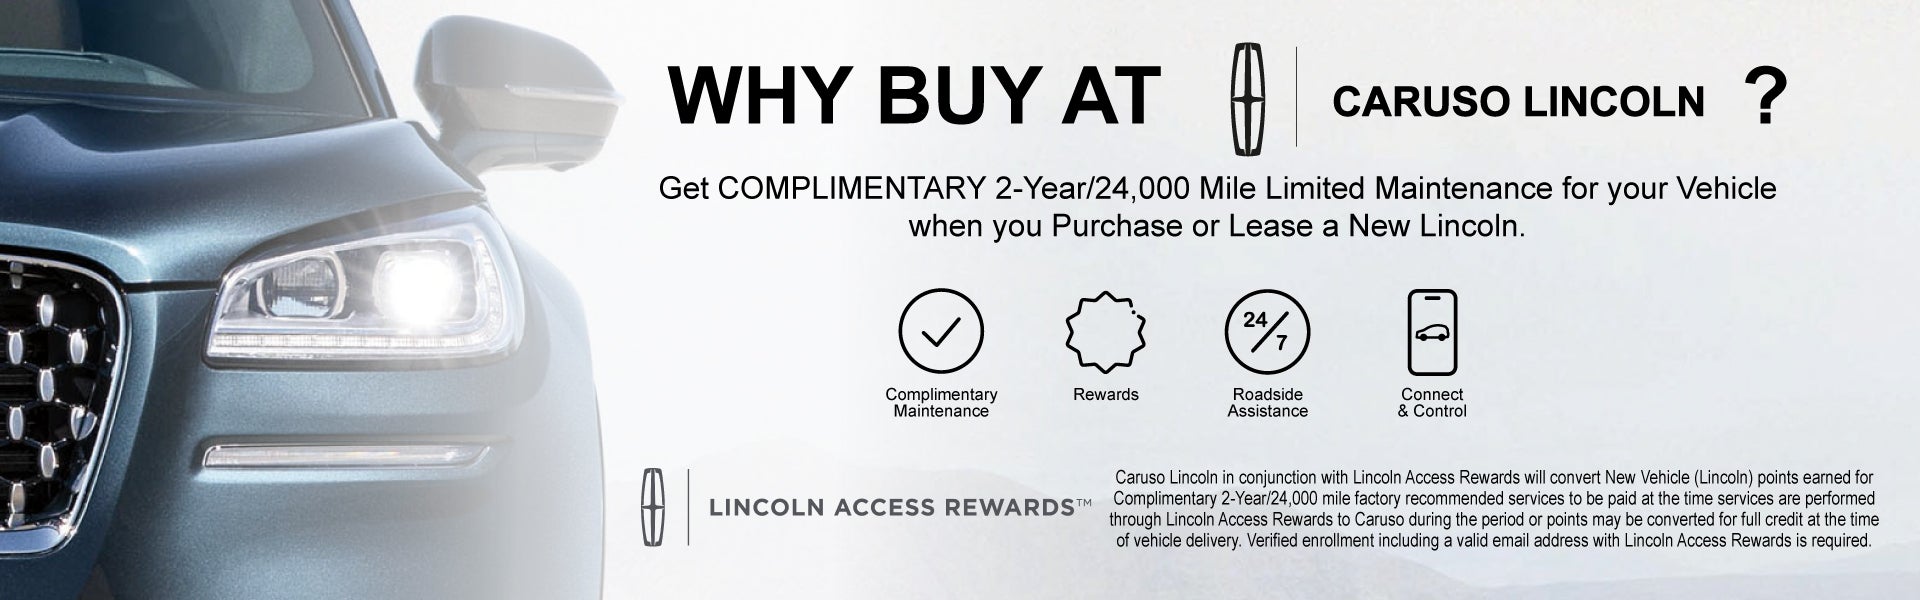 Why Buy at Caruso Lincoln?